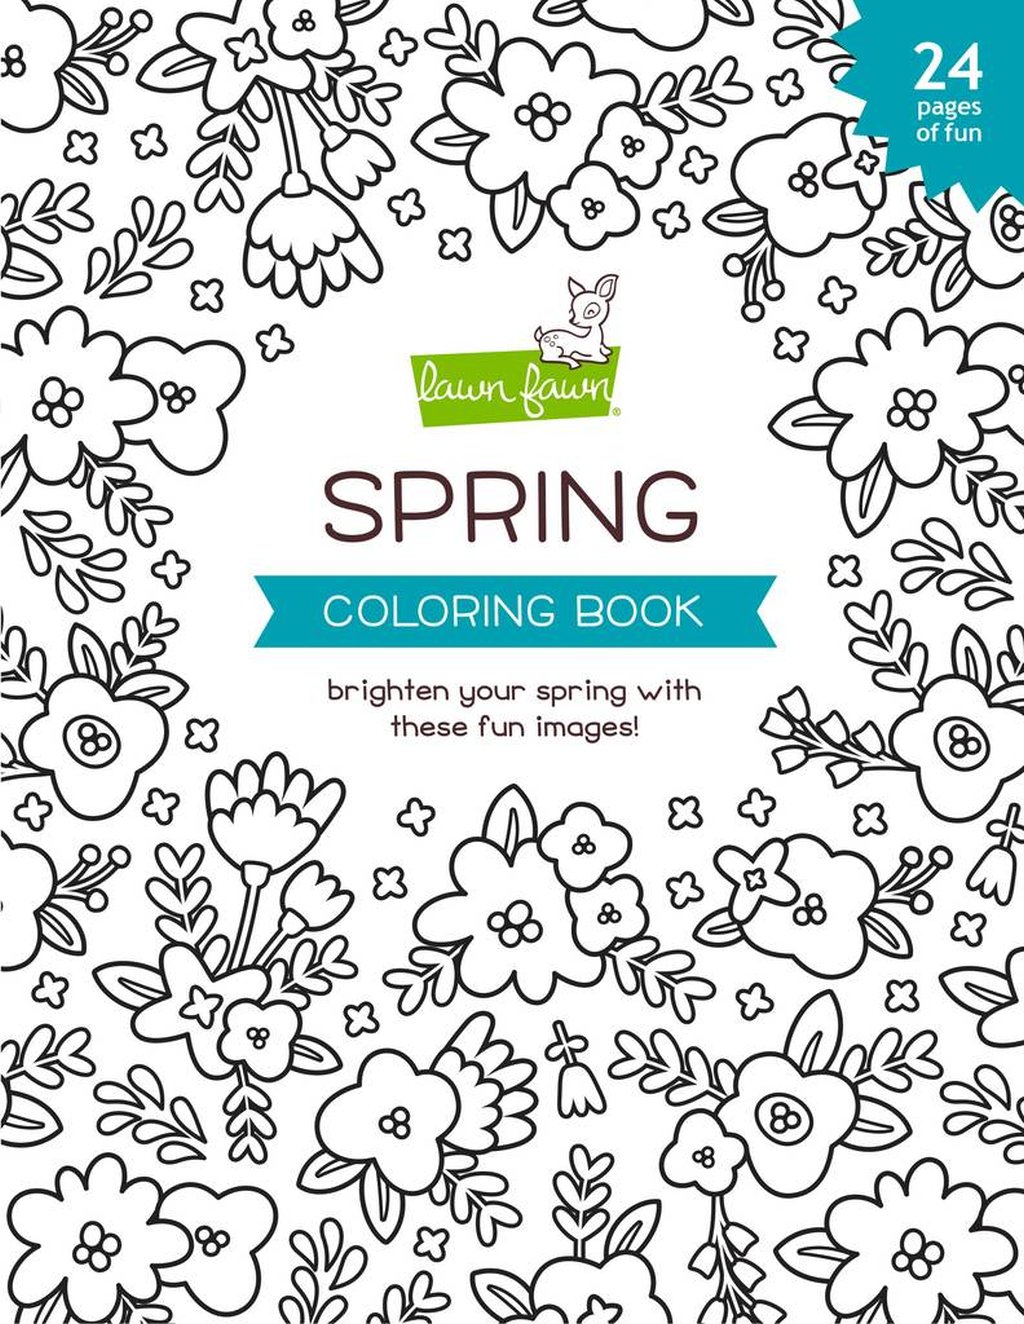 Spring Coloring Book   Lawn Fawn